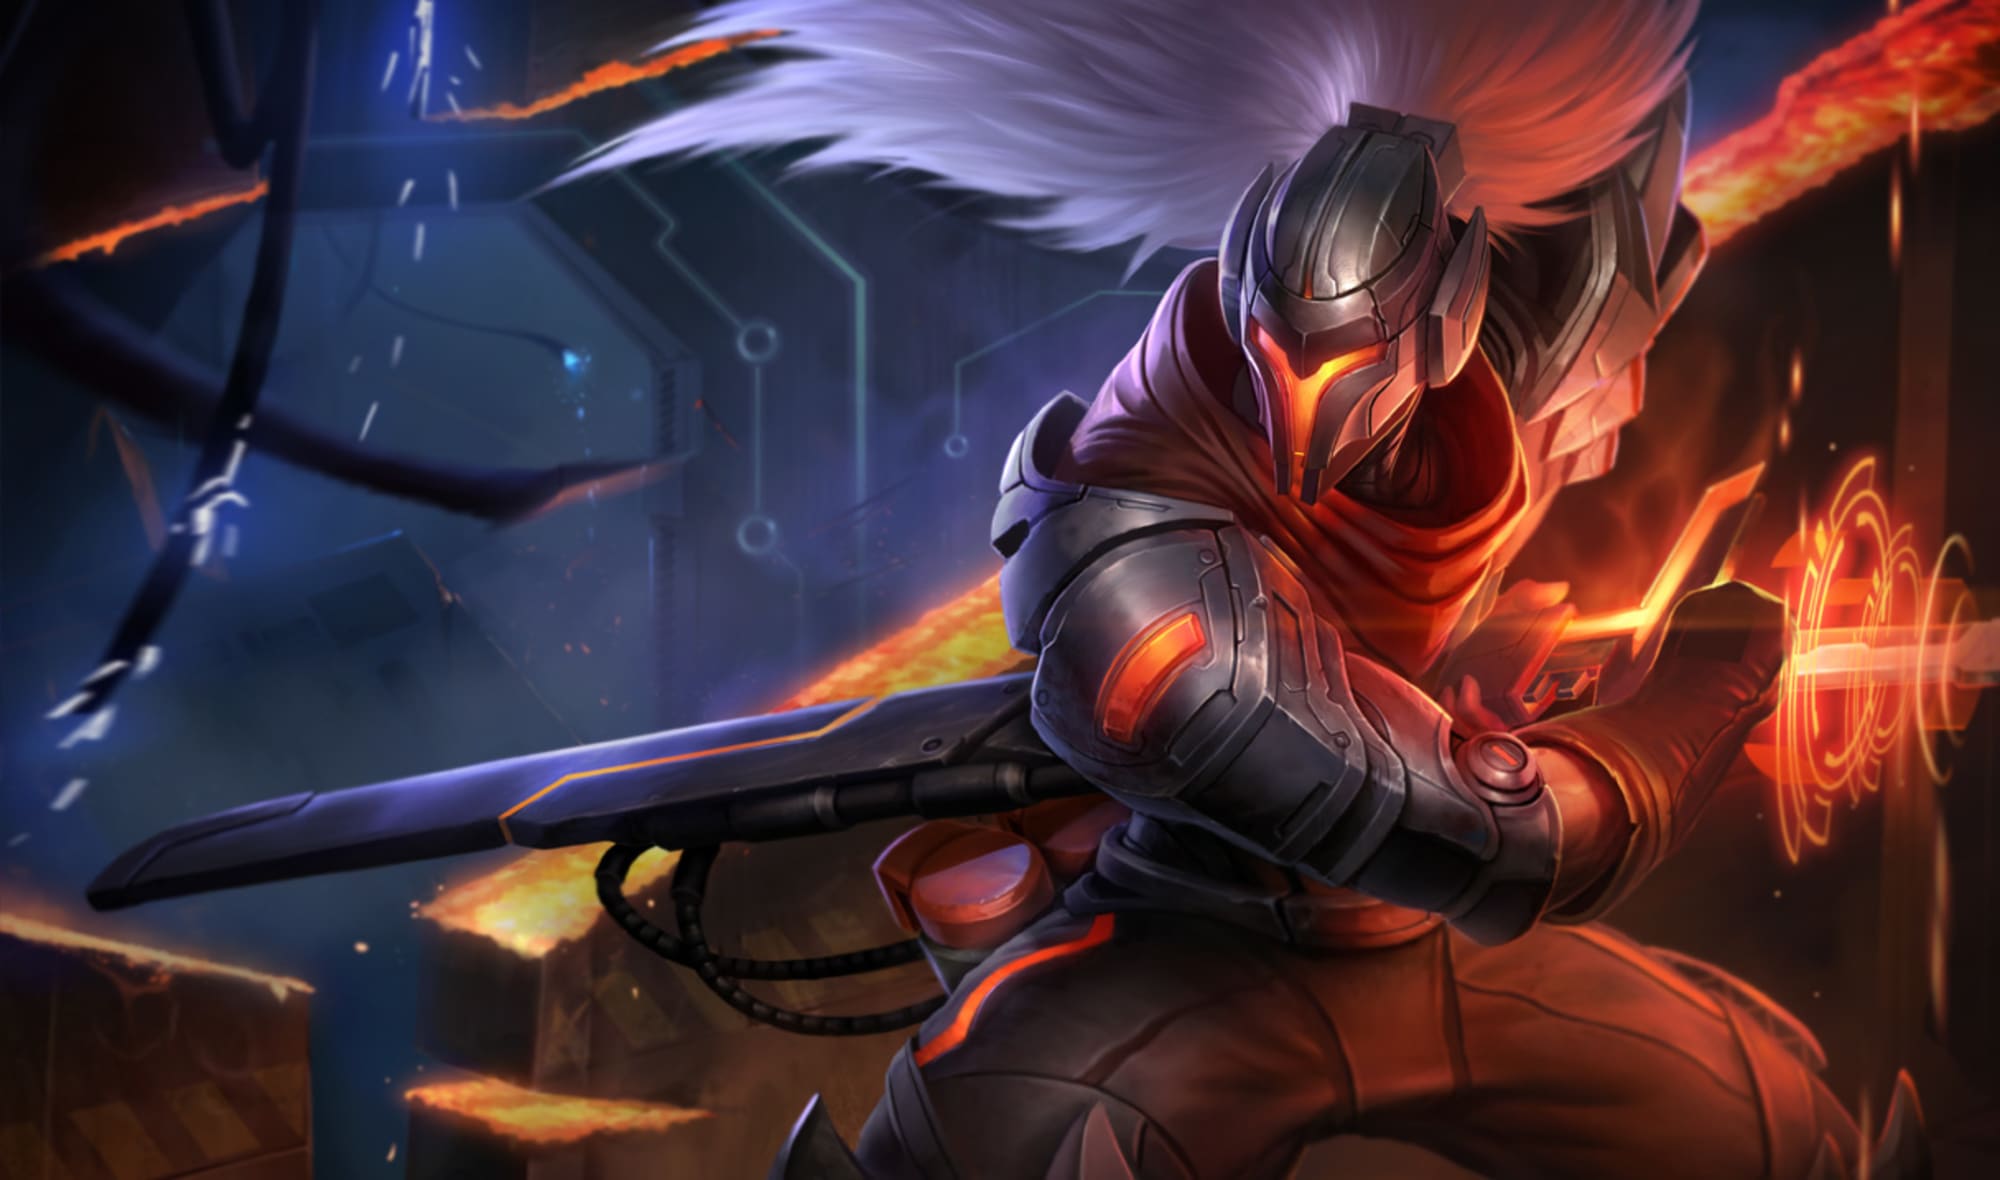 bande Udgående Habubu Is Yasuo getting nerfed in next patch? - League of Legends